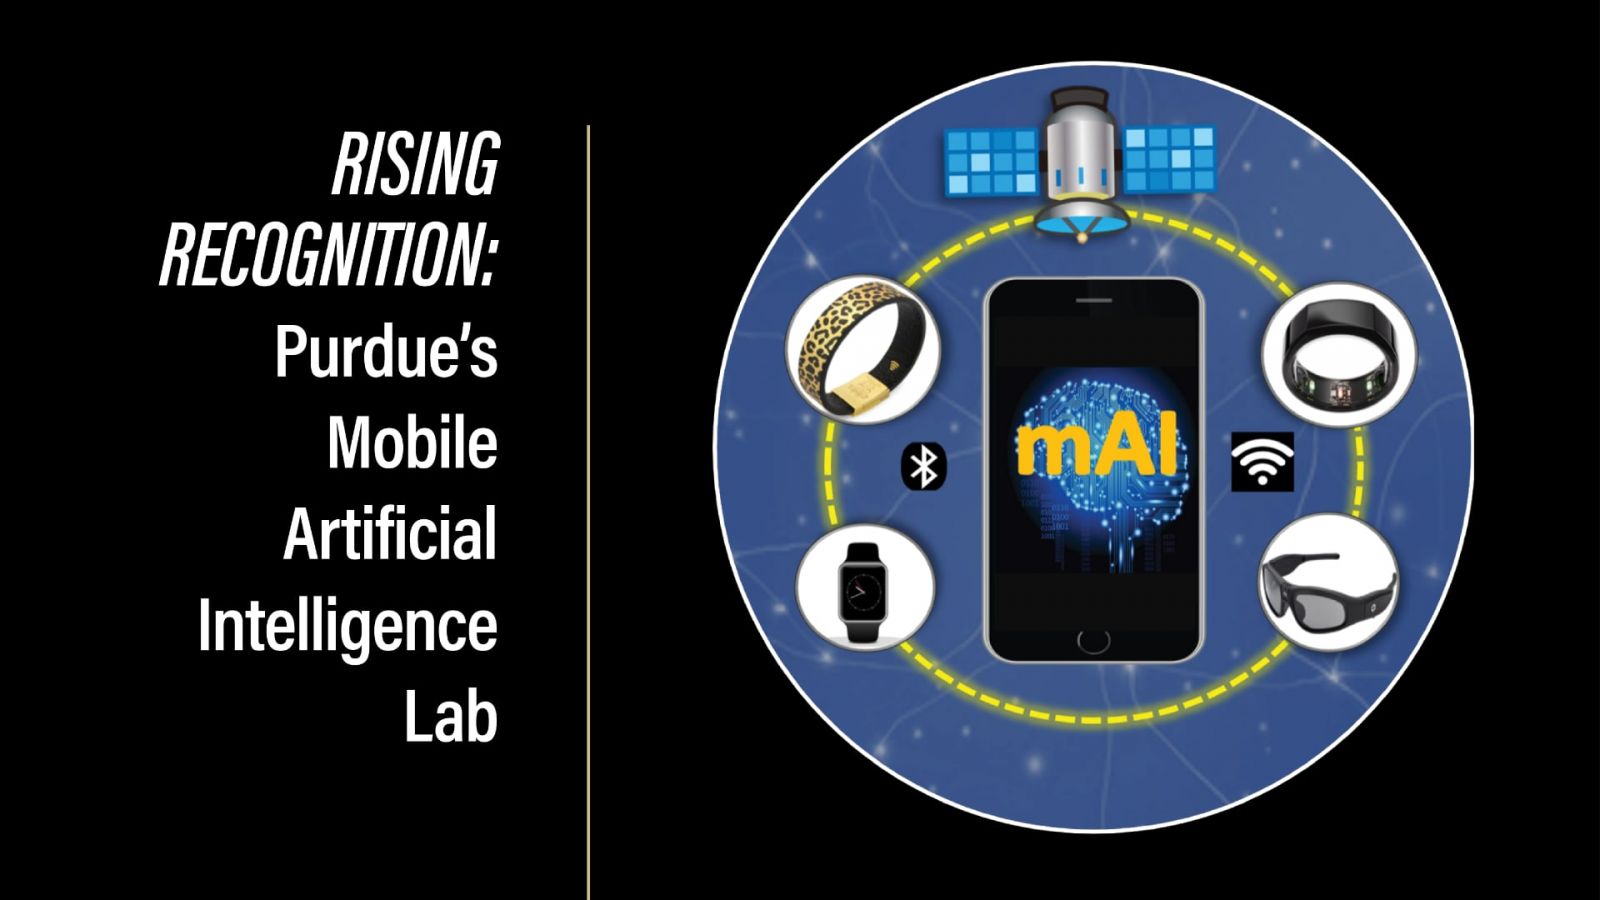 Rising recognition: Purdue's Mobile Artificial Intelligence Lab